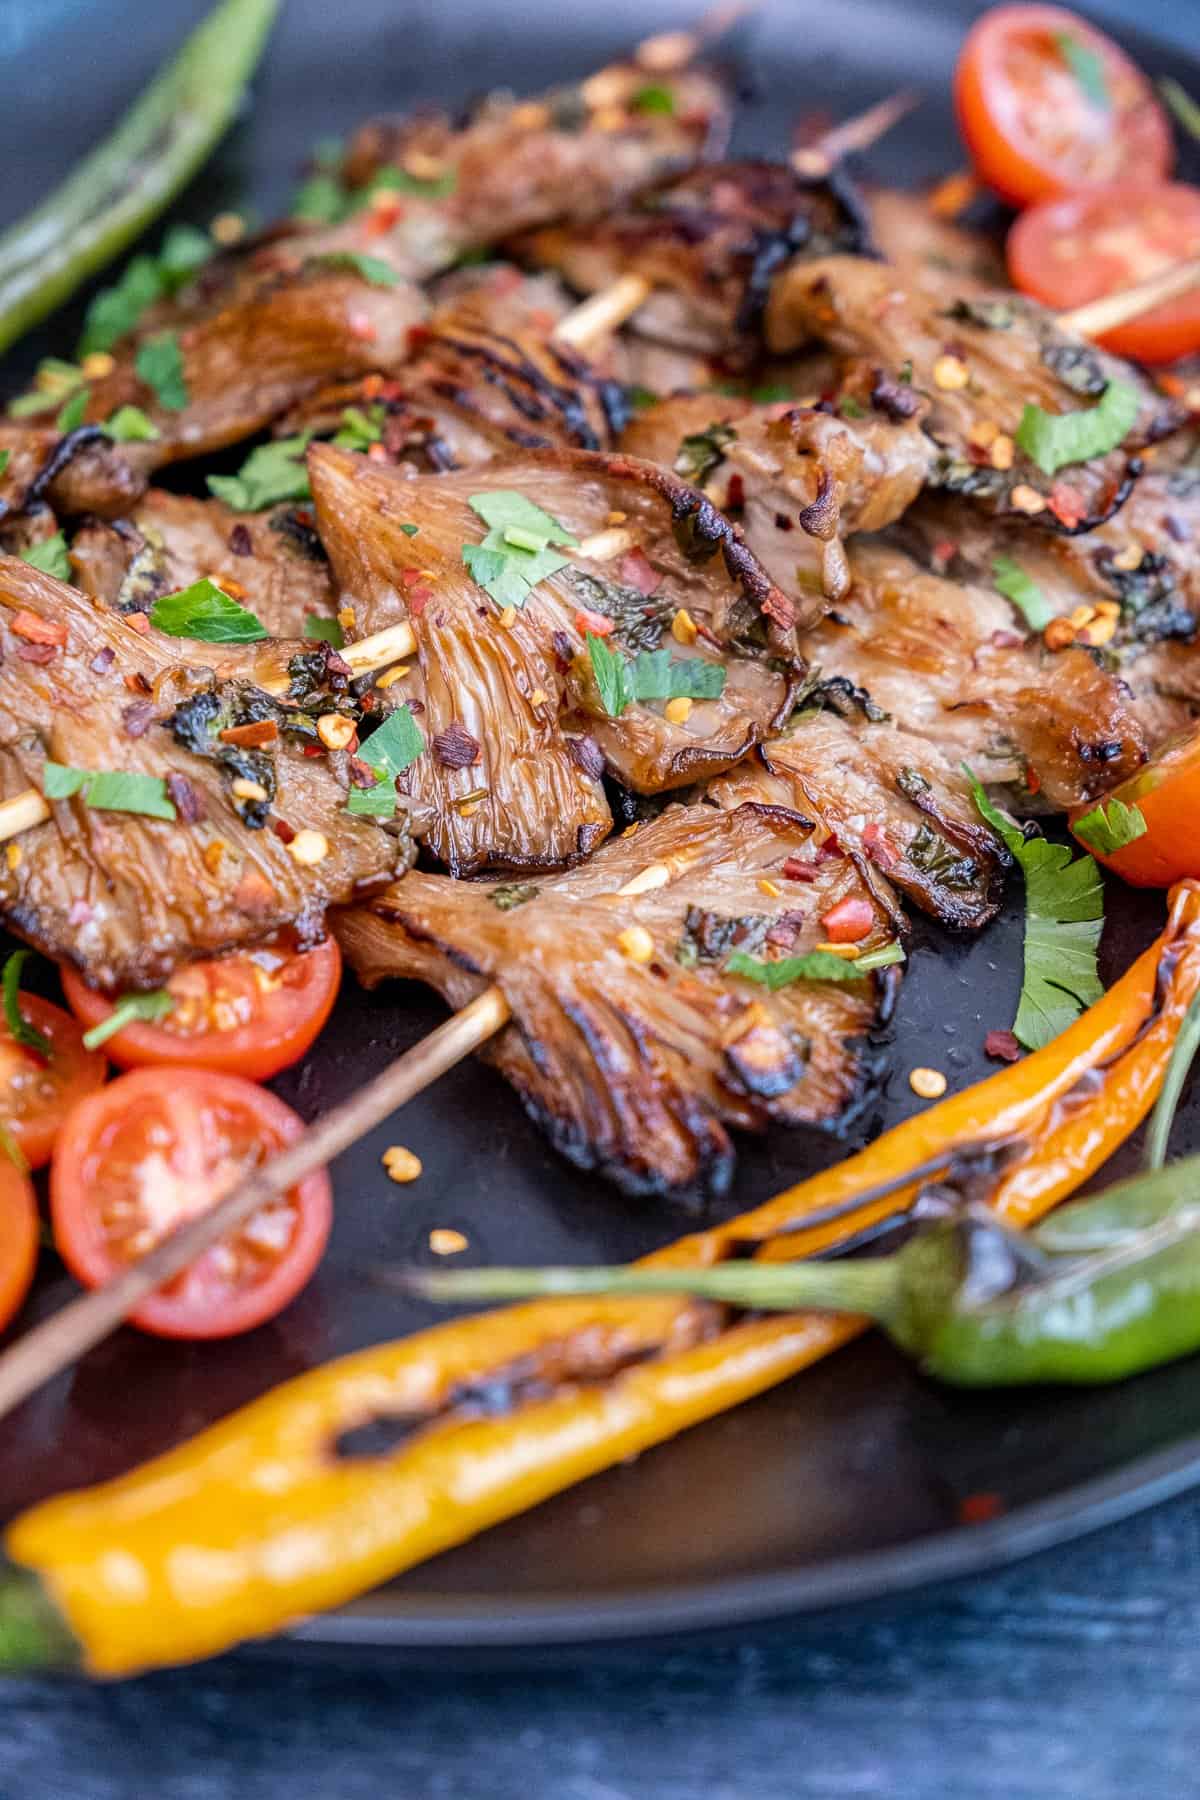 Grilled oyster mushrooms on skewers served with grilled peppers and tomatoes on a black plate.